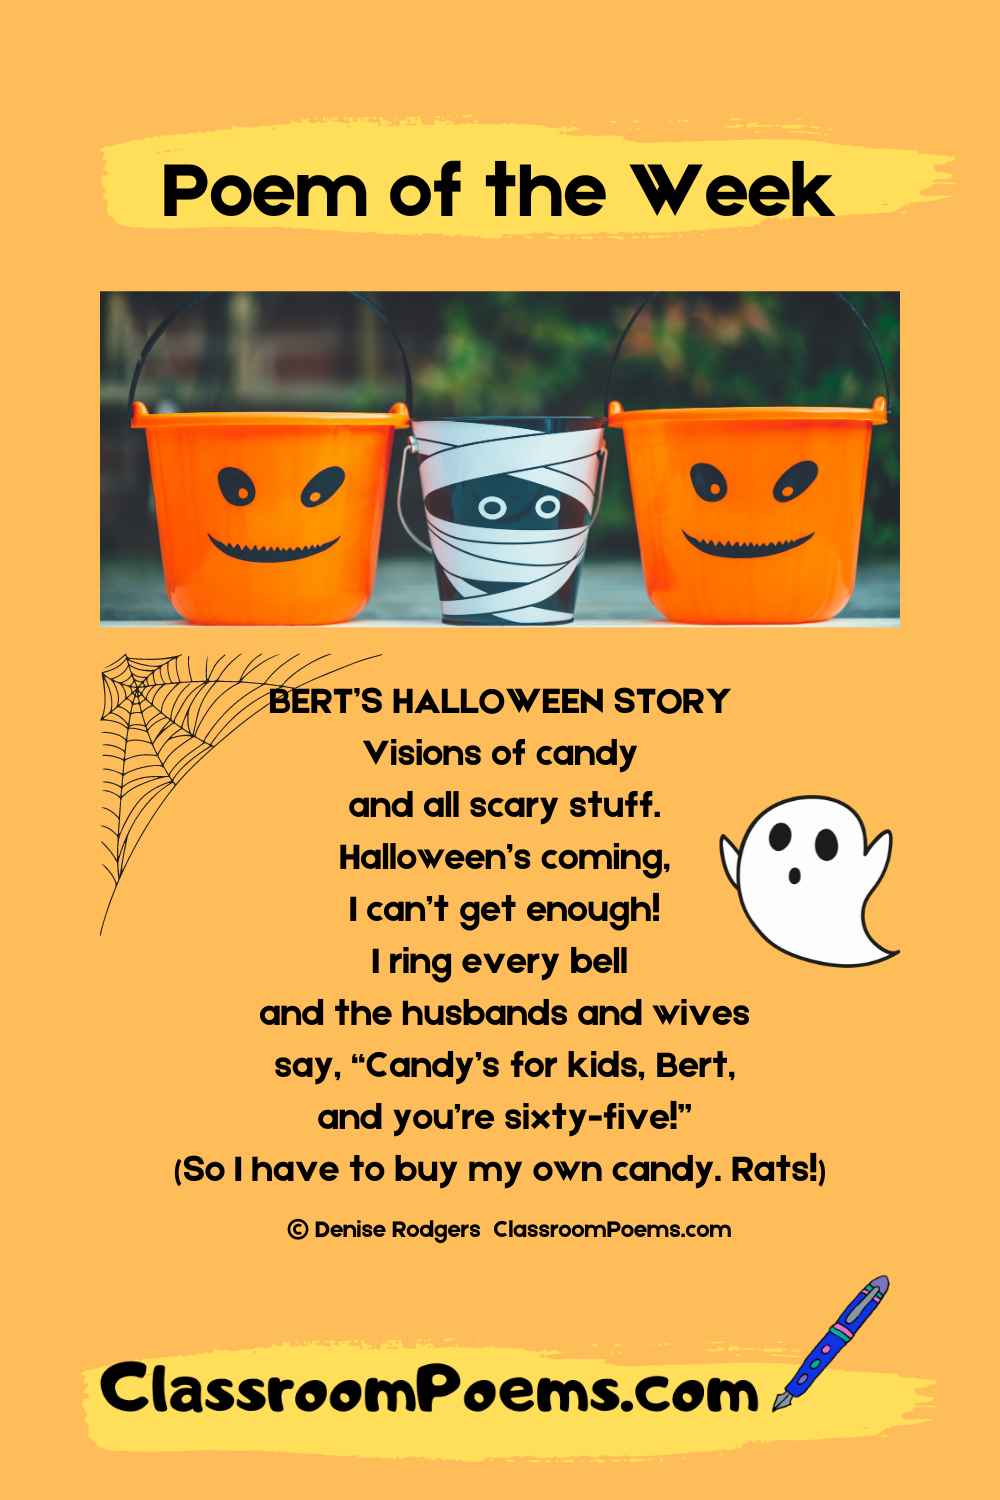 Bert's Halloween, a funny Halloween poem for kids by Denise Rodgers on ClassroomPoems.com.